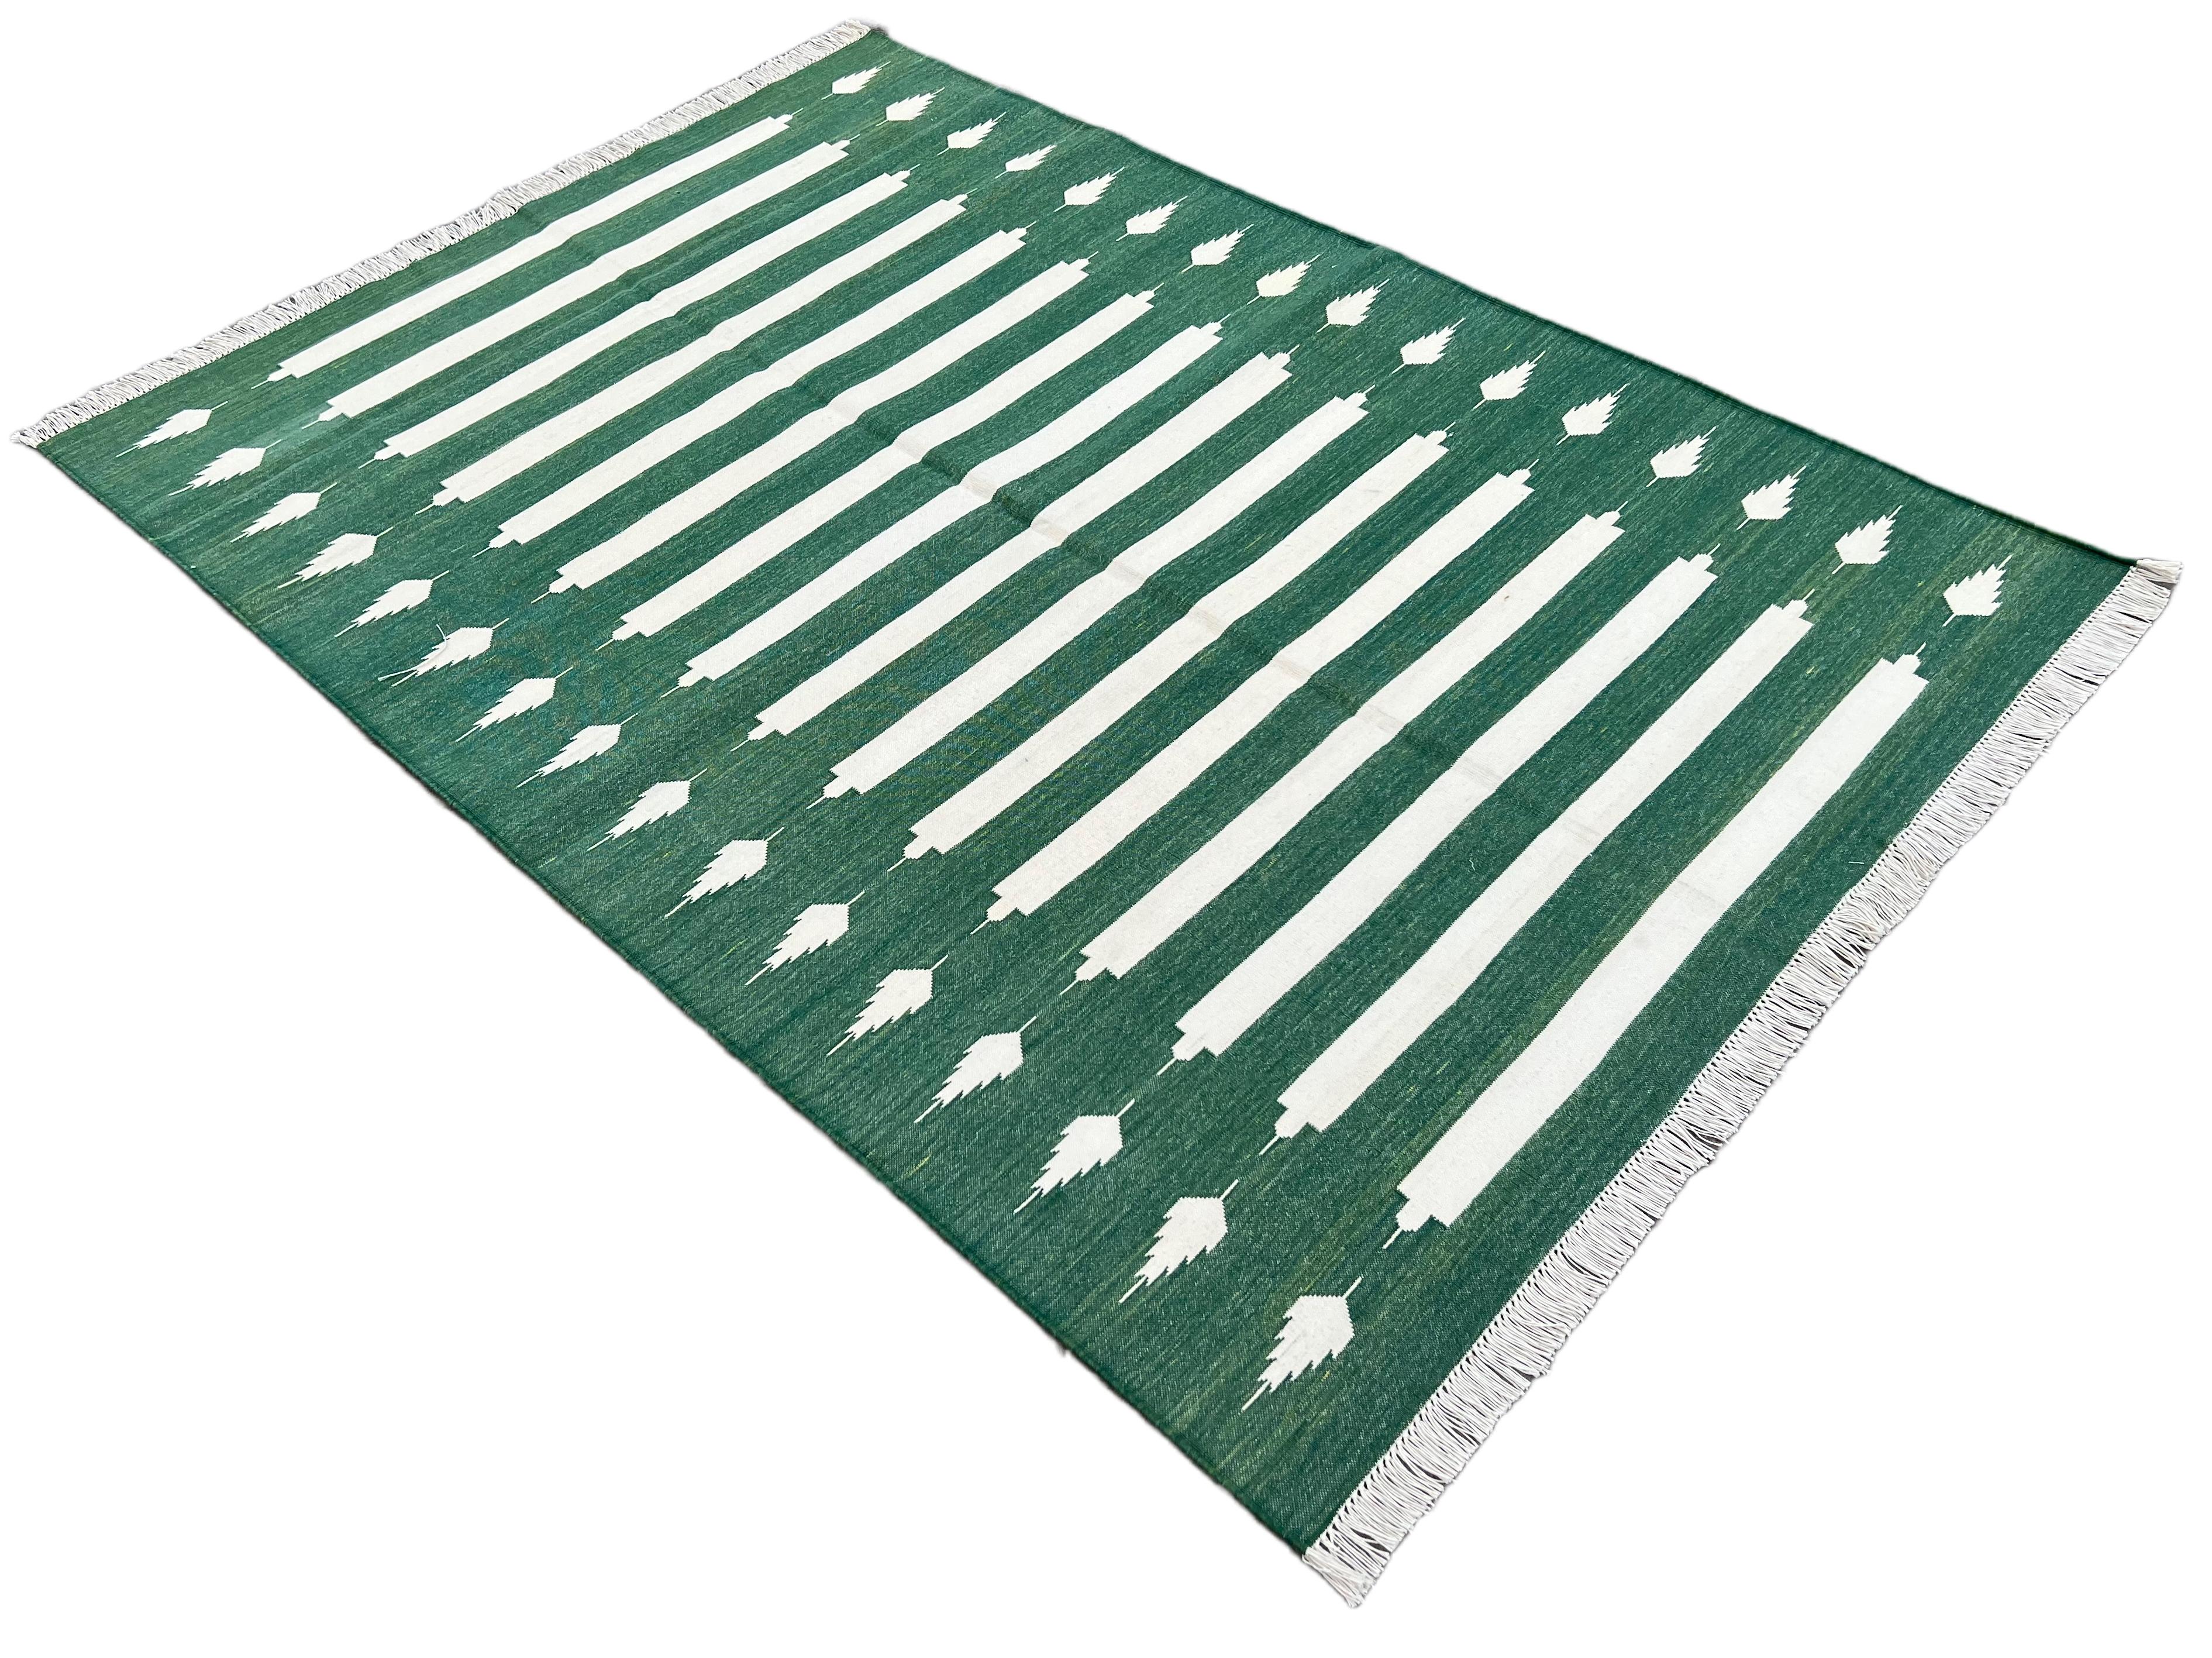 Cotton Natural Vegetable Dyed Forest Green And White Striped Rug-4'x6'
These special flat-weave dhurries are hand-woven with 15 ply 100% cotton yarn. Due to the special manufacturing techniques used to create our rugs, the size and color of each